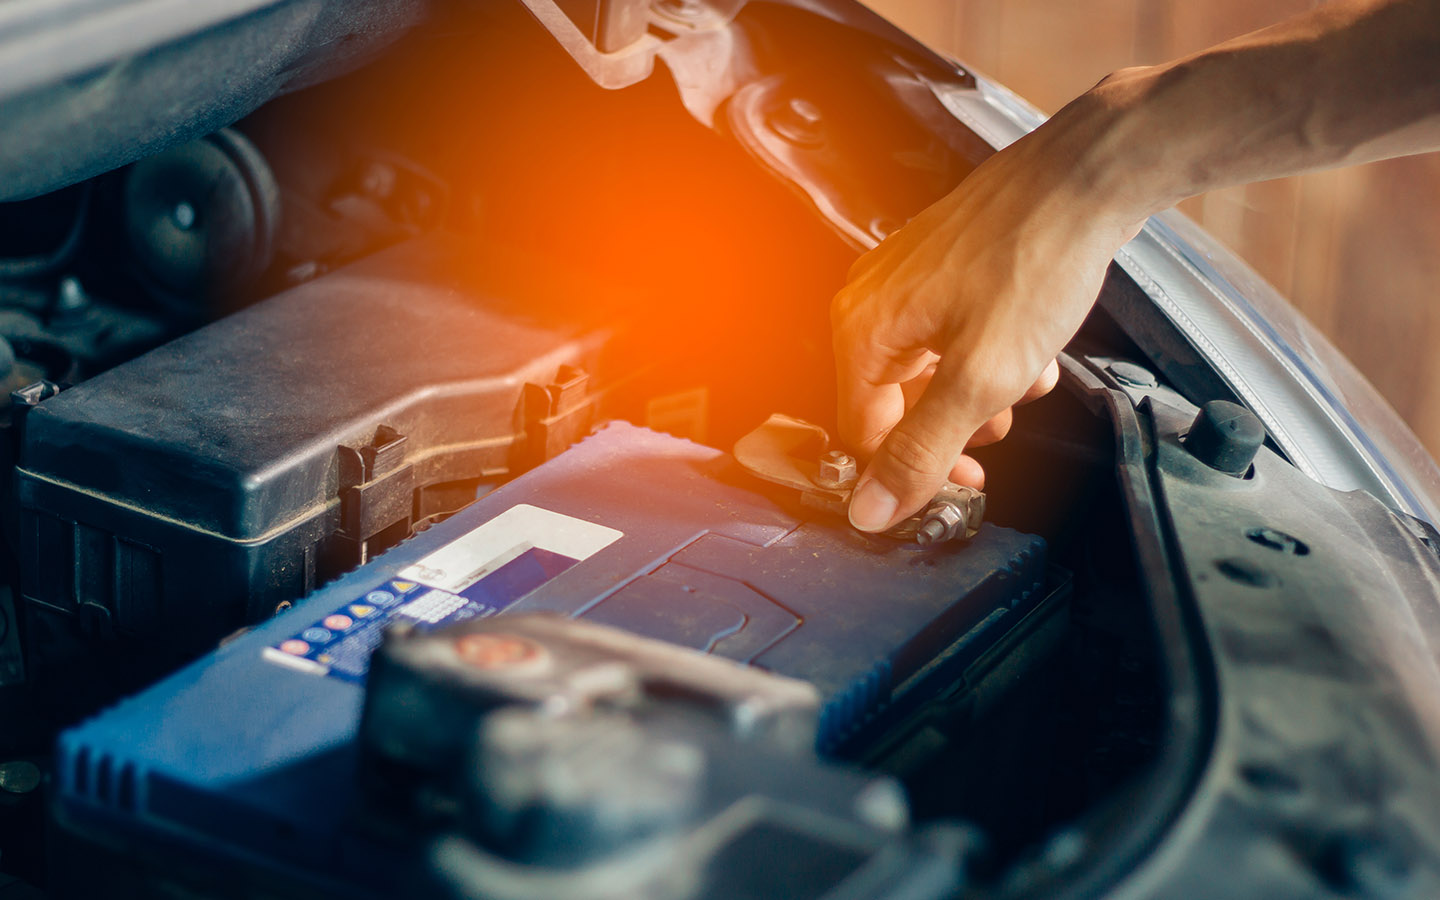 replacing a car battery is also among the eas diy car repairs for owners